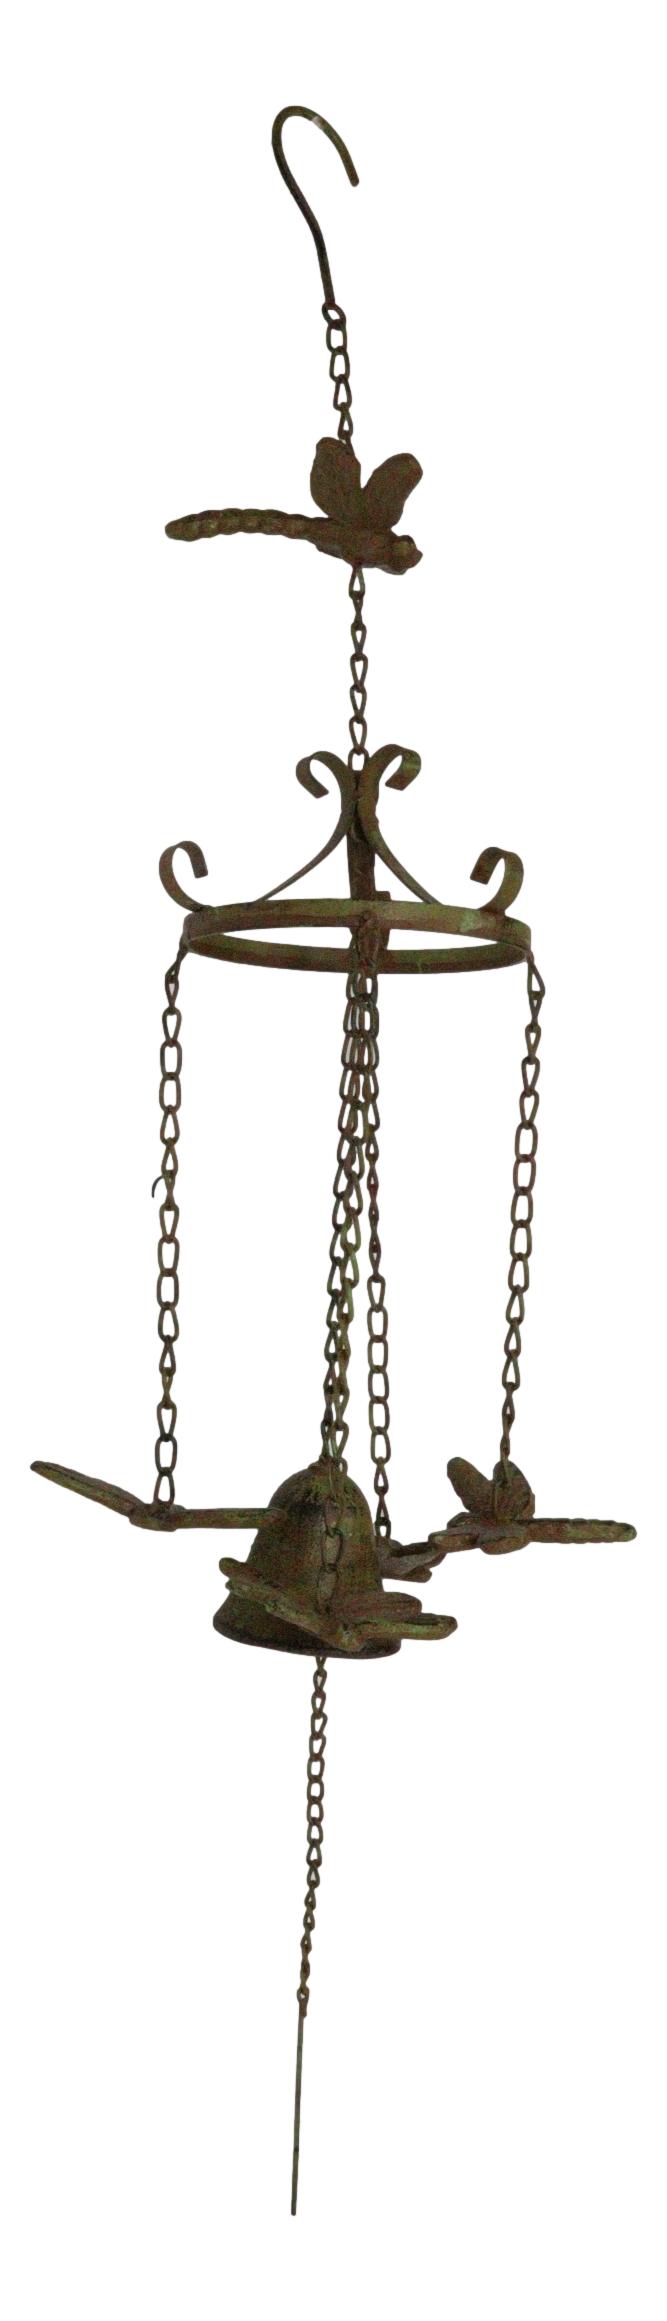 Rustic Cast Iron Cottage Garden Dragonfly New Beginnings Quaint Bell Wind Chime